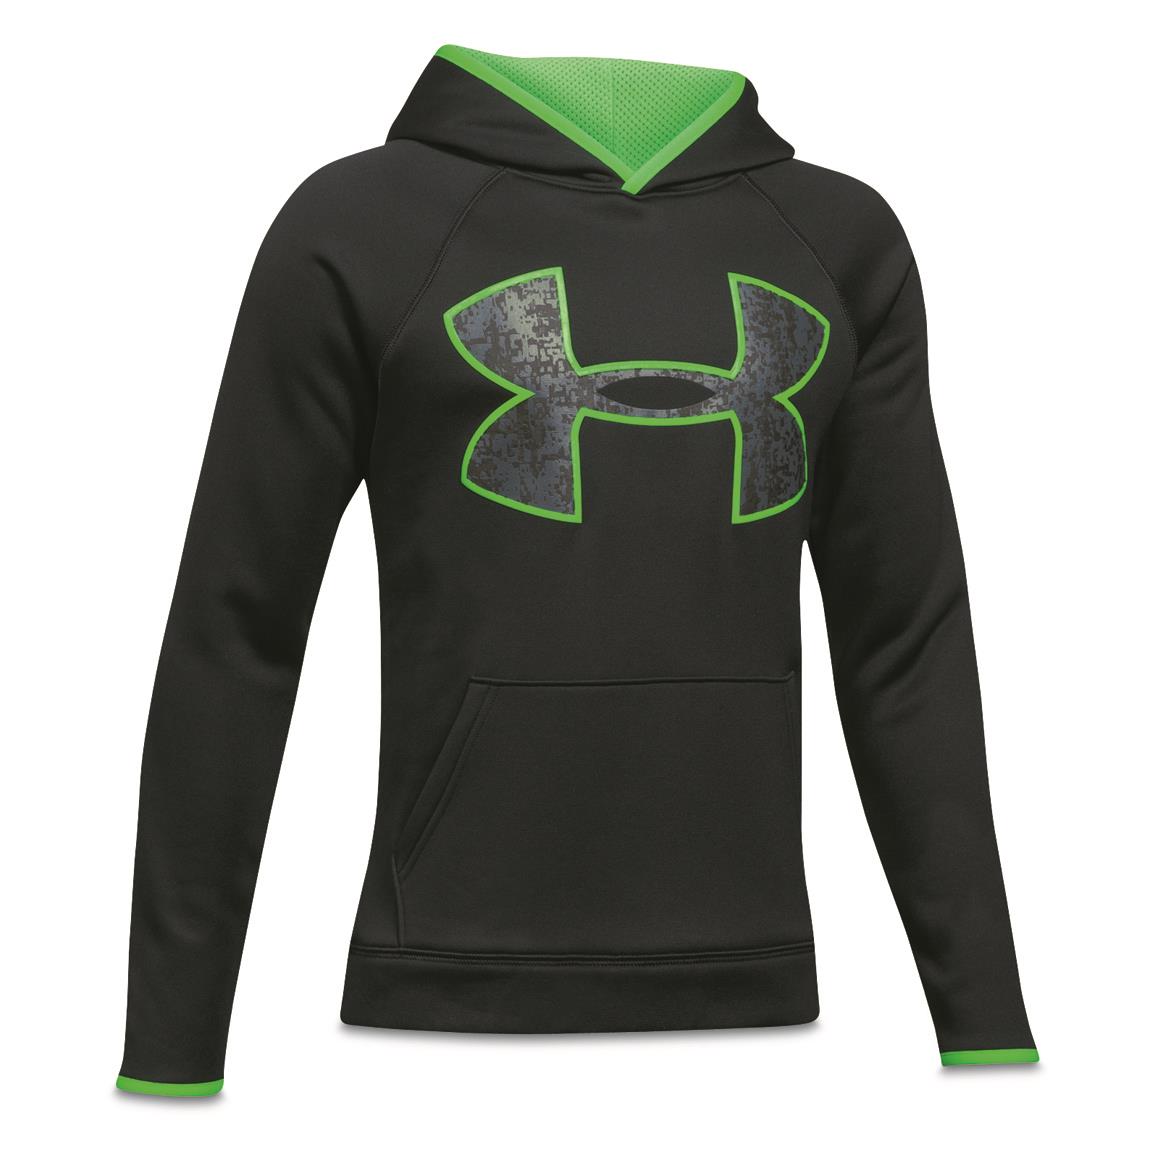 Cheap under armour black and lime green 